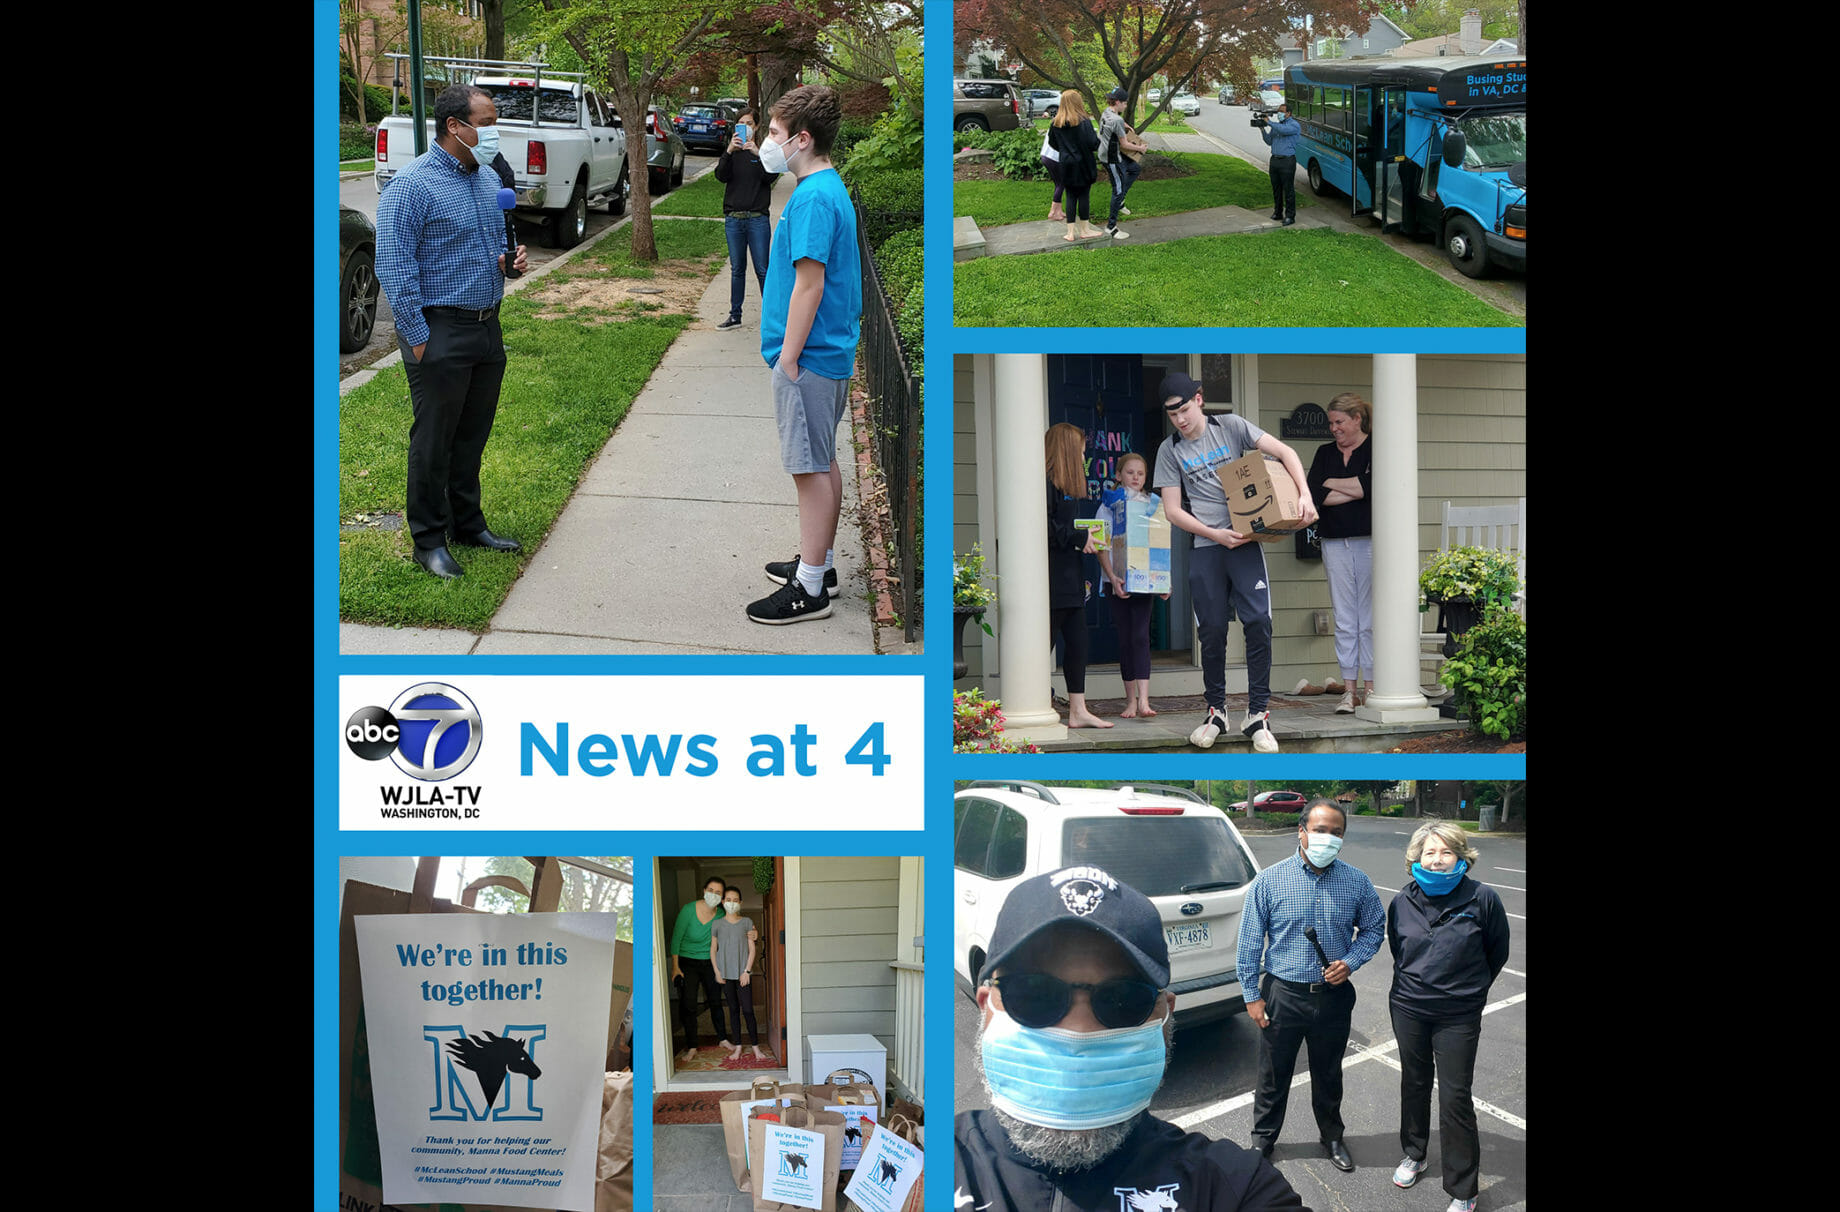 Tune into ABC7 News tonight at 4:15 pm to see Director of Student and Community Wellness, Frankie Engelking, Director of Community Inclusion and External Relations, Bobby Edwards, and the Mustang Blue Bus, make the rounds to pick up meals for Manna Food Center from our #McLeanSchool community members. ⁠ ⁠ #DistanceLearning #ABC7News